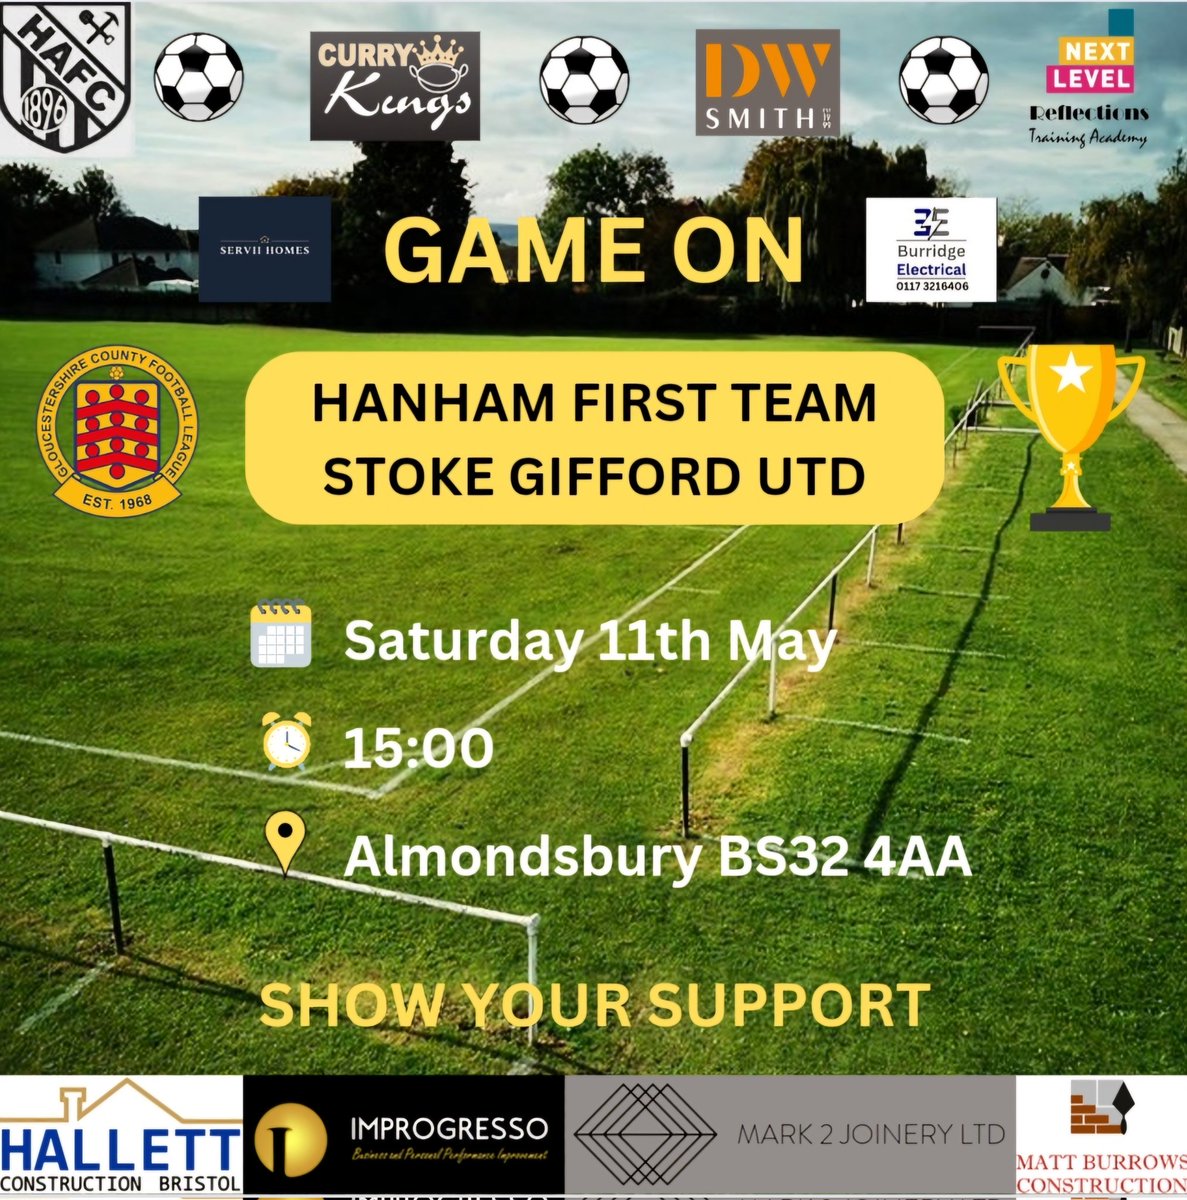 Here we go then, the Les James League Cup Final is this Saturday, at Almondsbury, 3pm KO! Come along and show your support to the lads! #HAFC #UTH